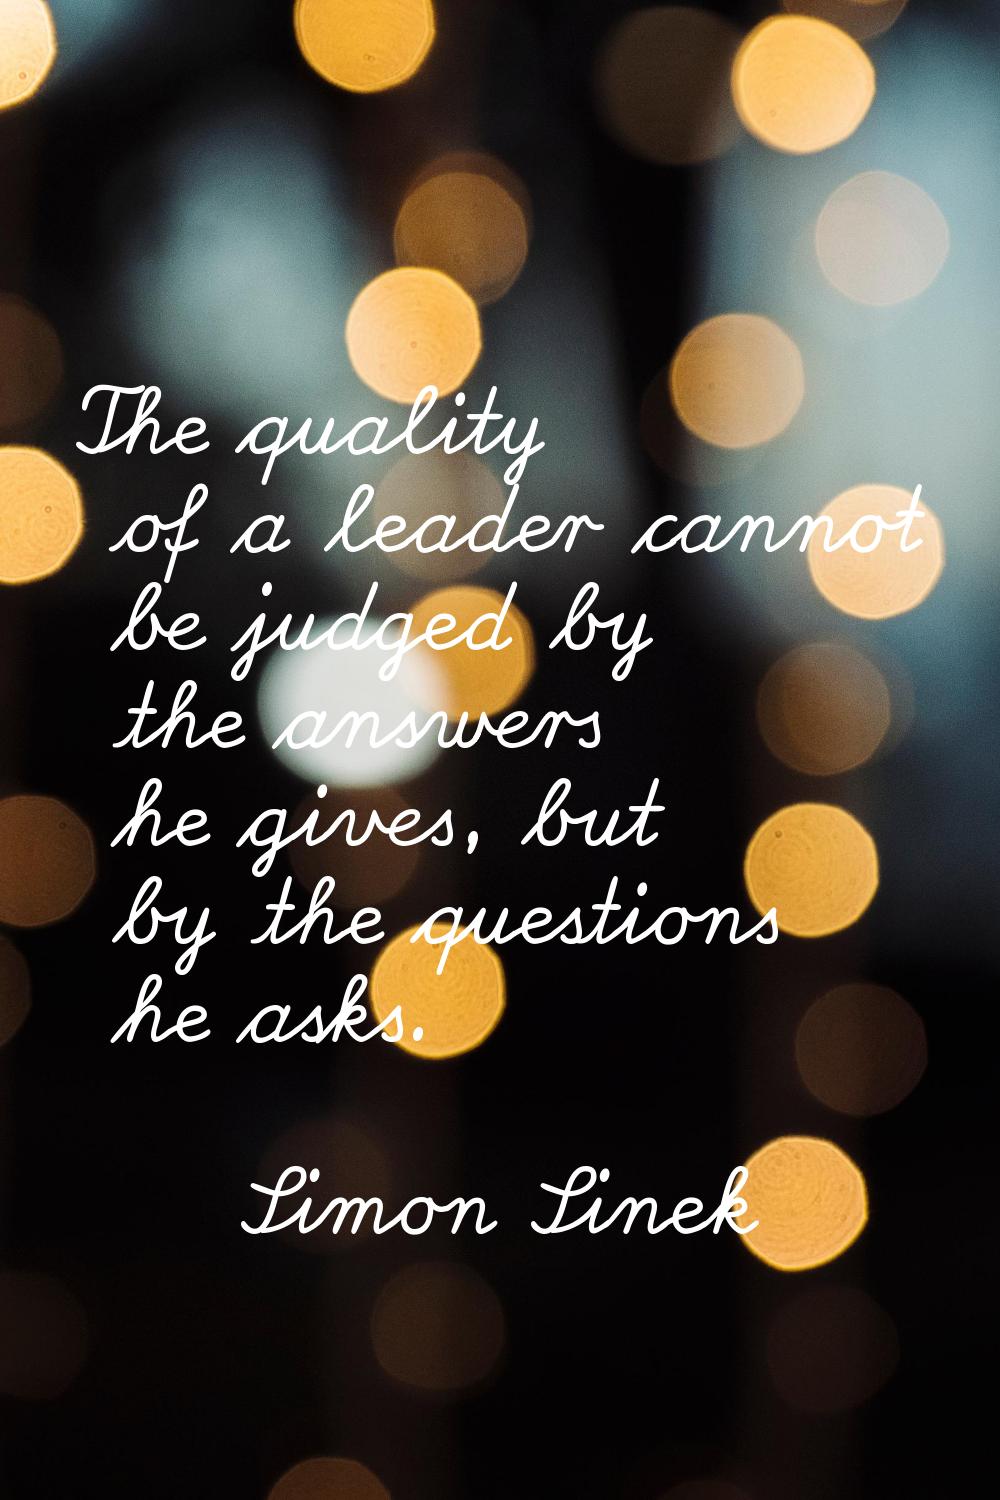 The quality of a leader cannot be judged by the answers he gives, but by the questions he asks.